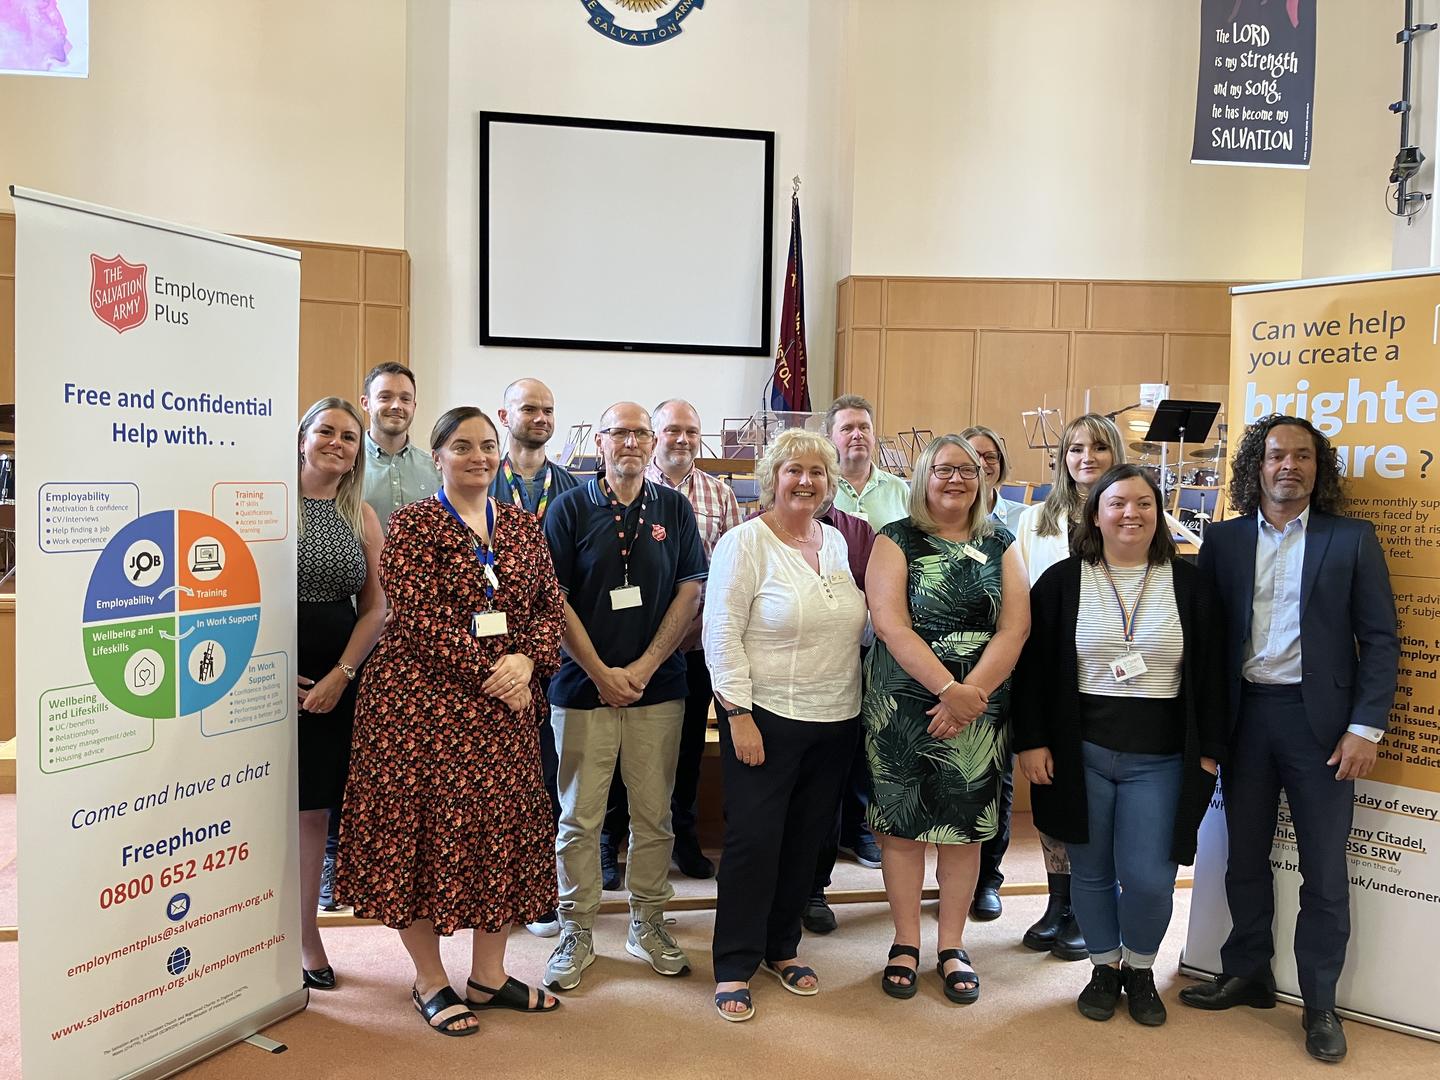 A group of people representing the partner groups involved in the Under One Roof service are pictured together at the launch in Bristol Citadel Salvation Army church.